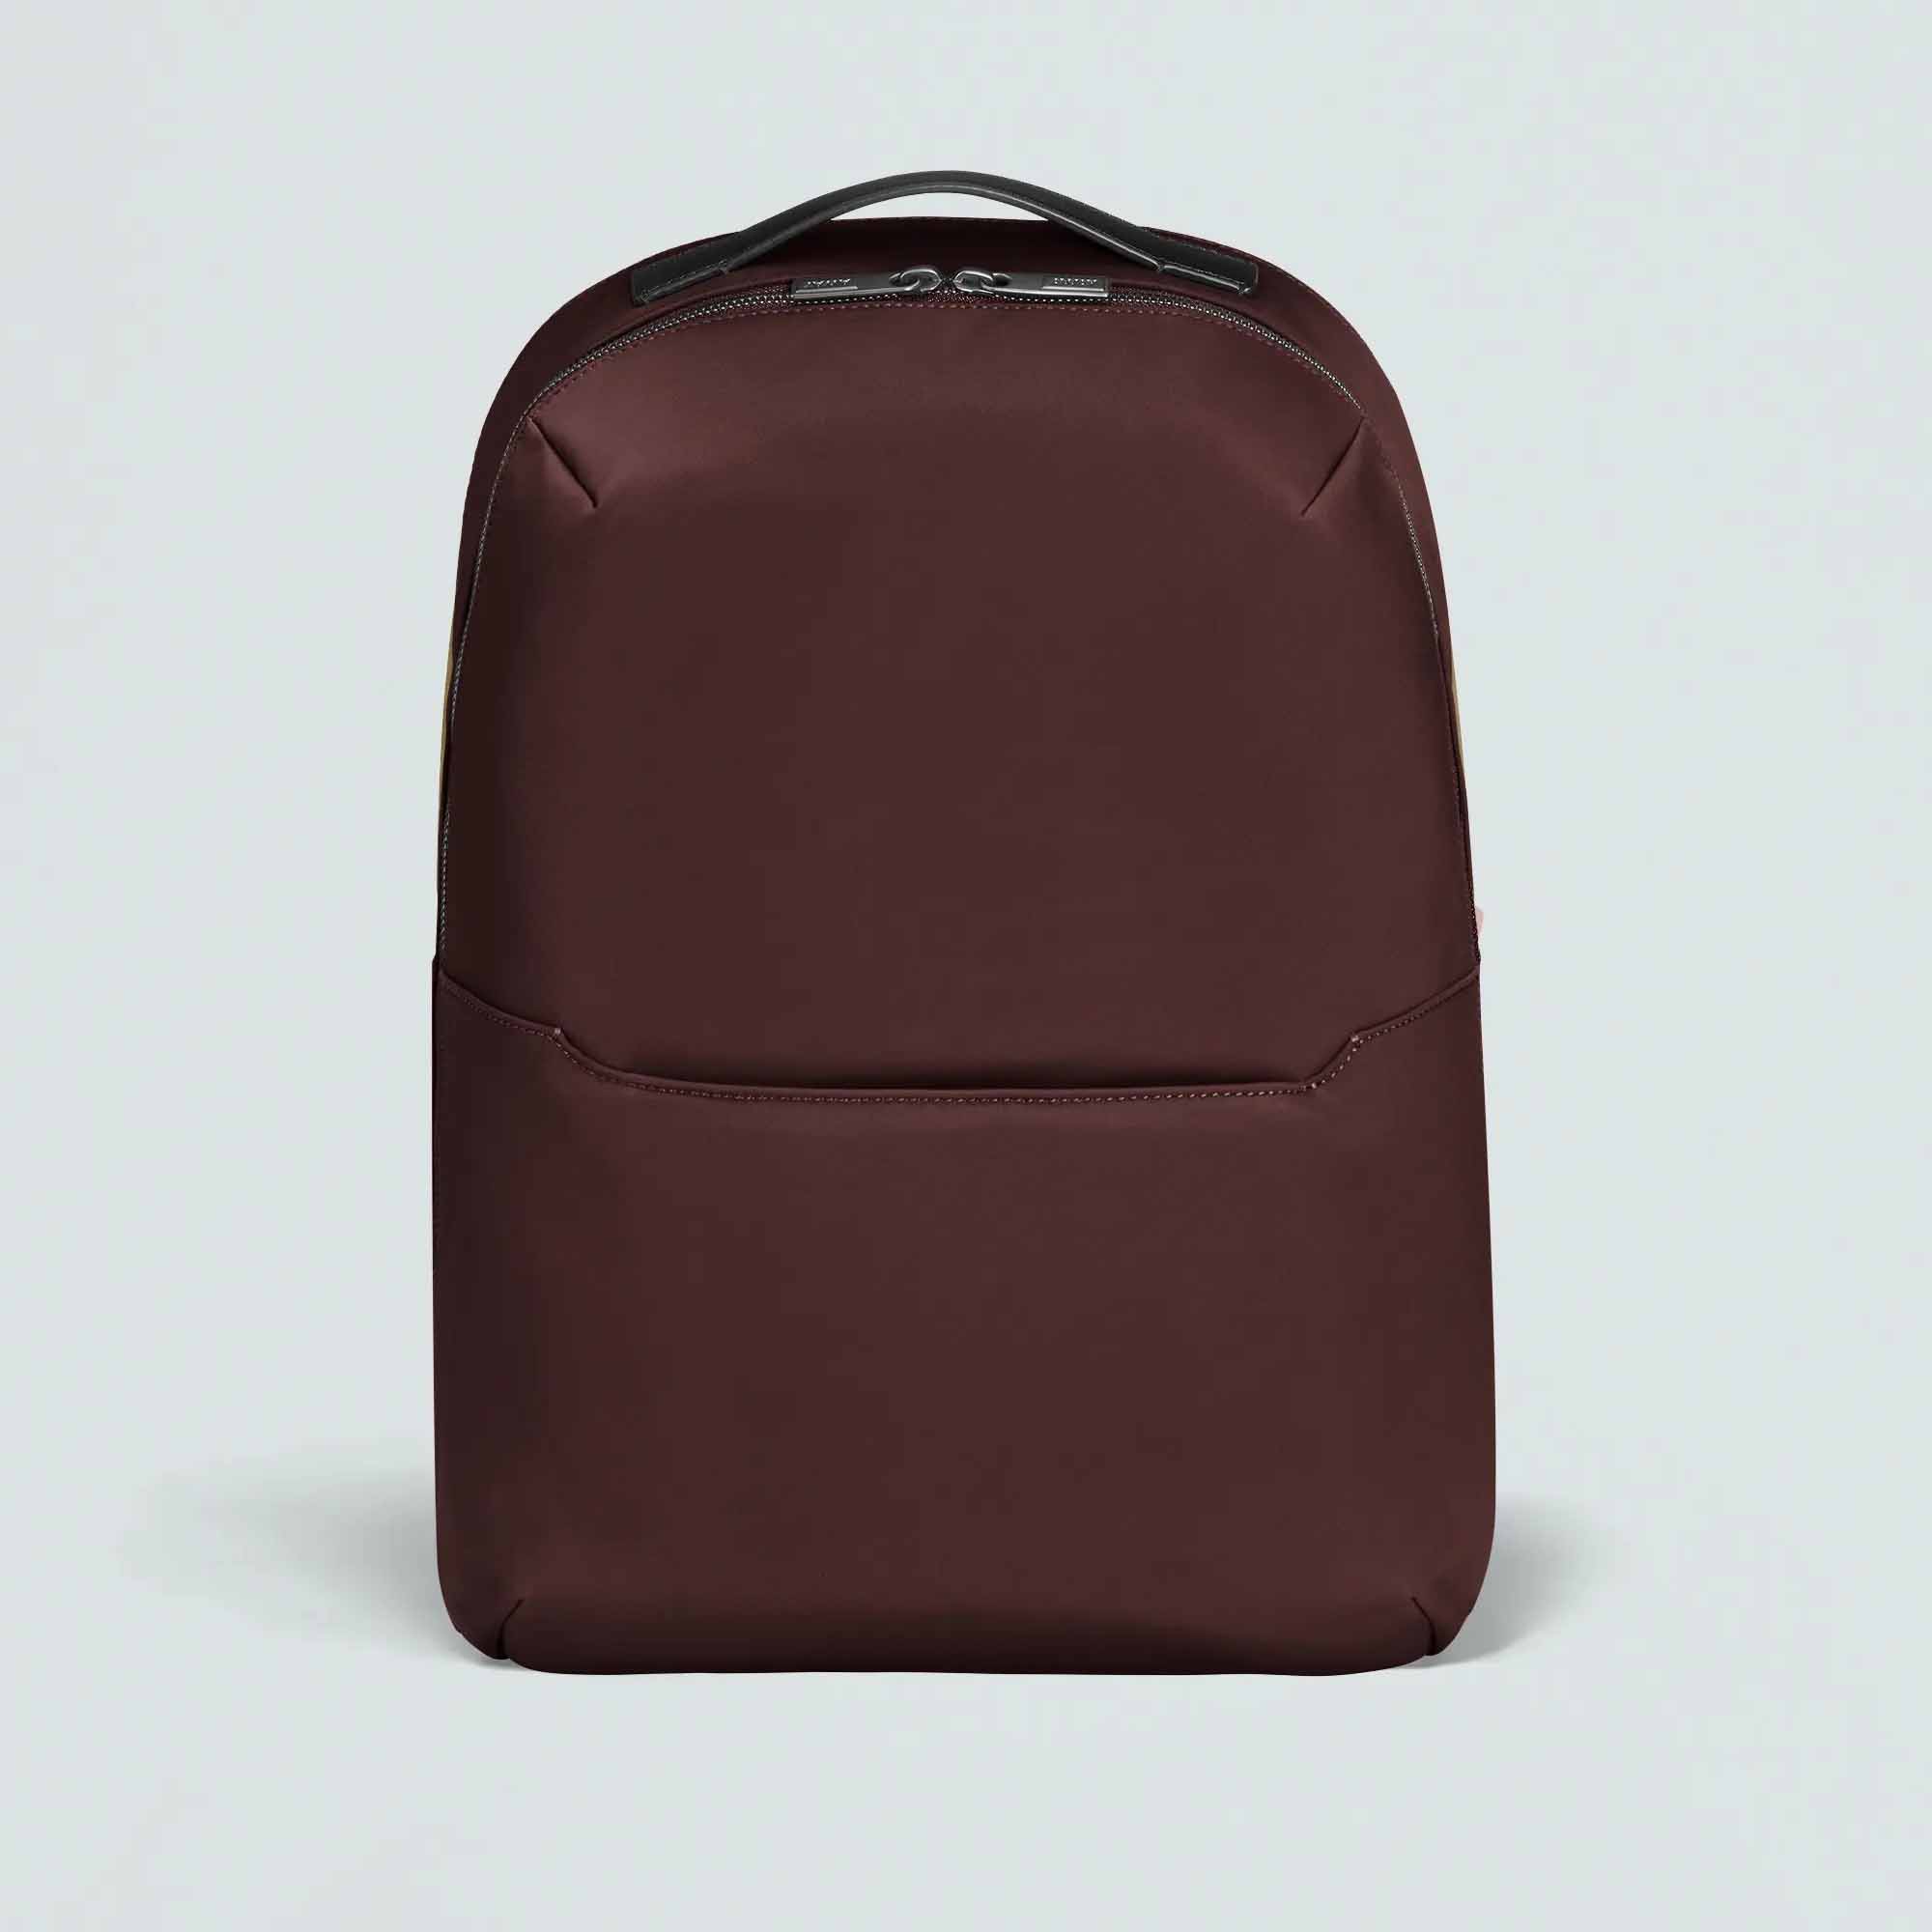 The Everywhere Zip Backpack in deep red